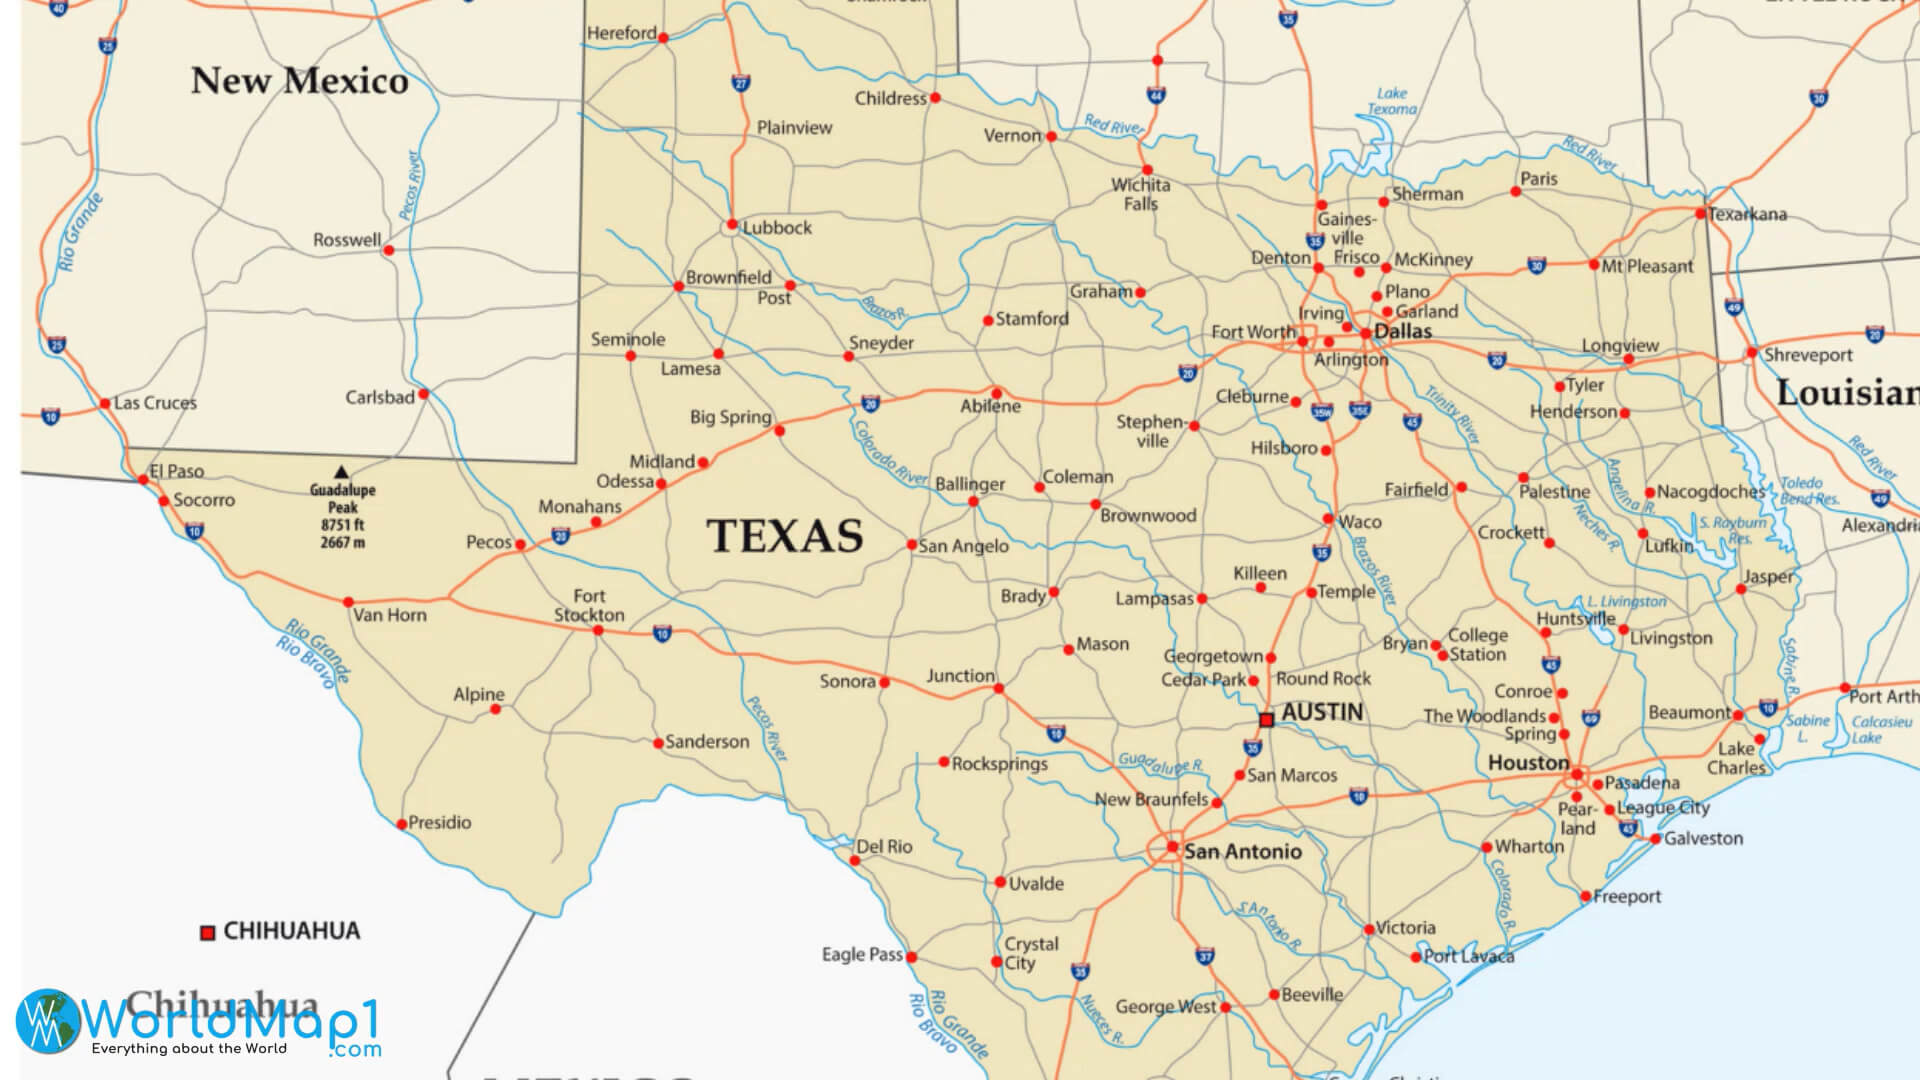 Texas Rivers and Roads Map